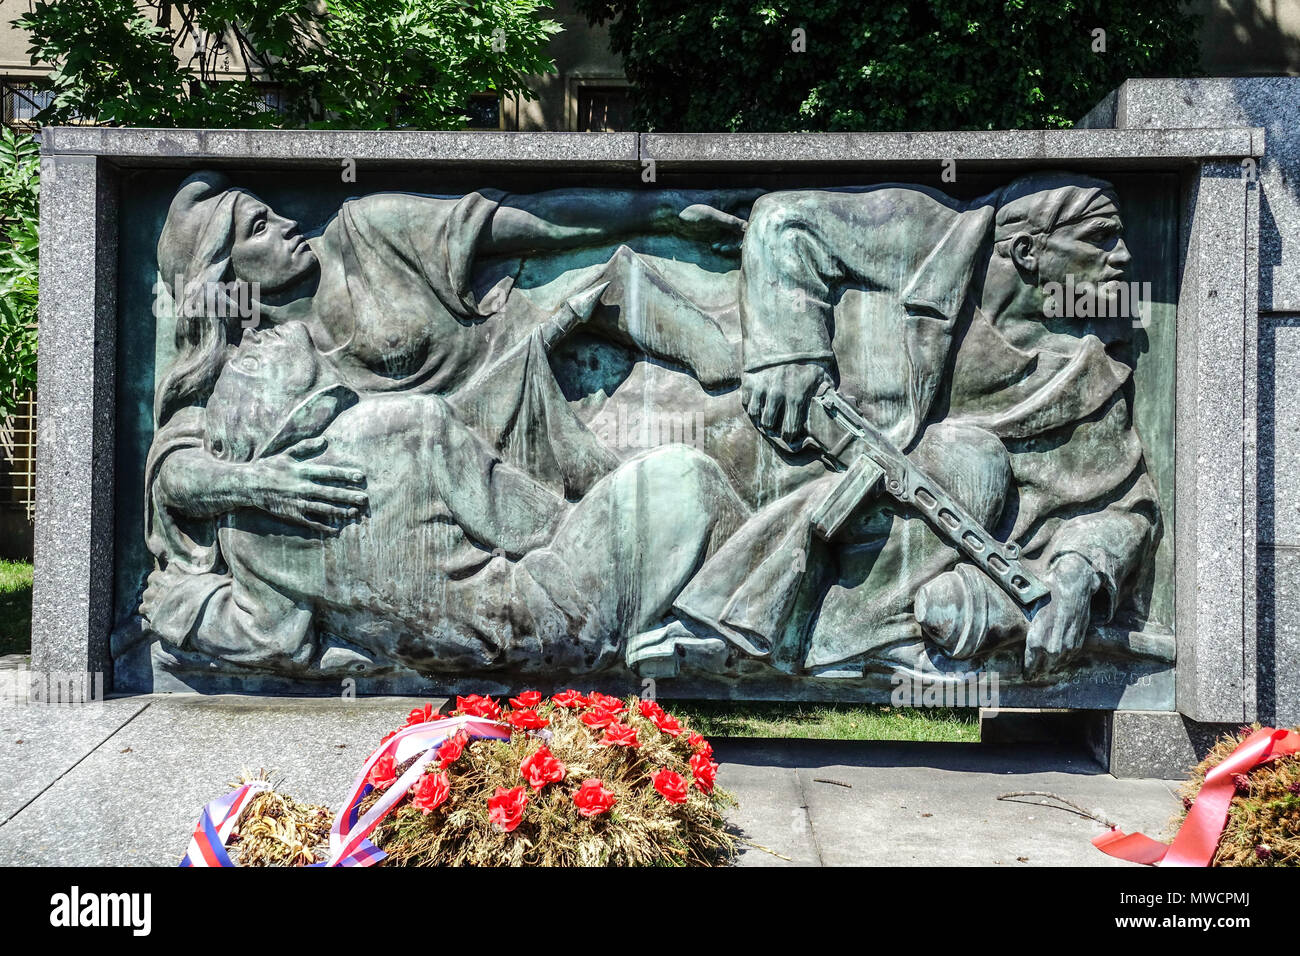 Memorial victim of the war from the years 1939 - 1945, Kolin, Czech Republic Stock Photo